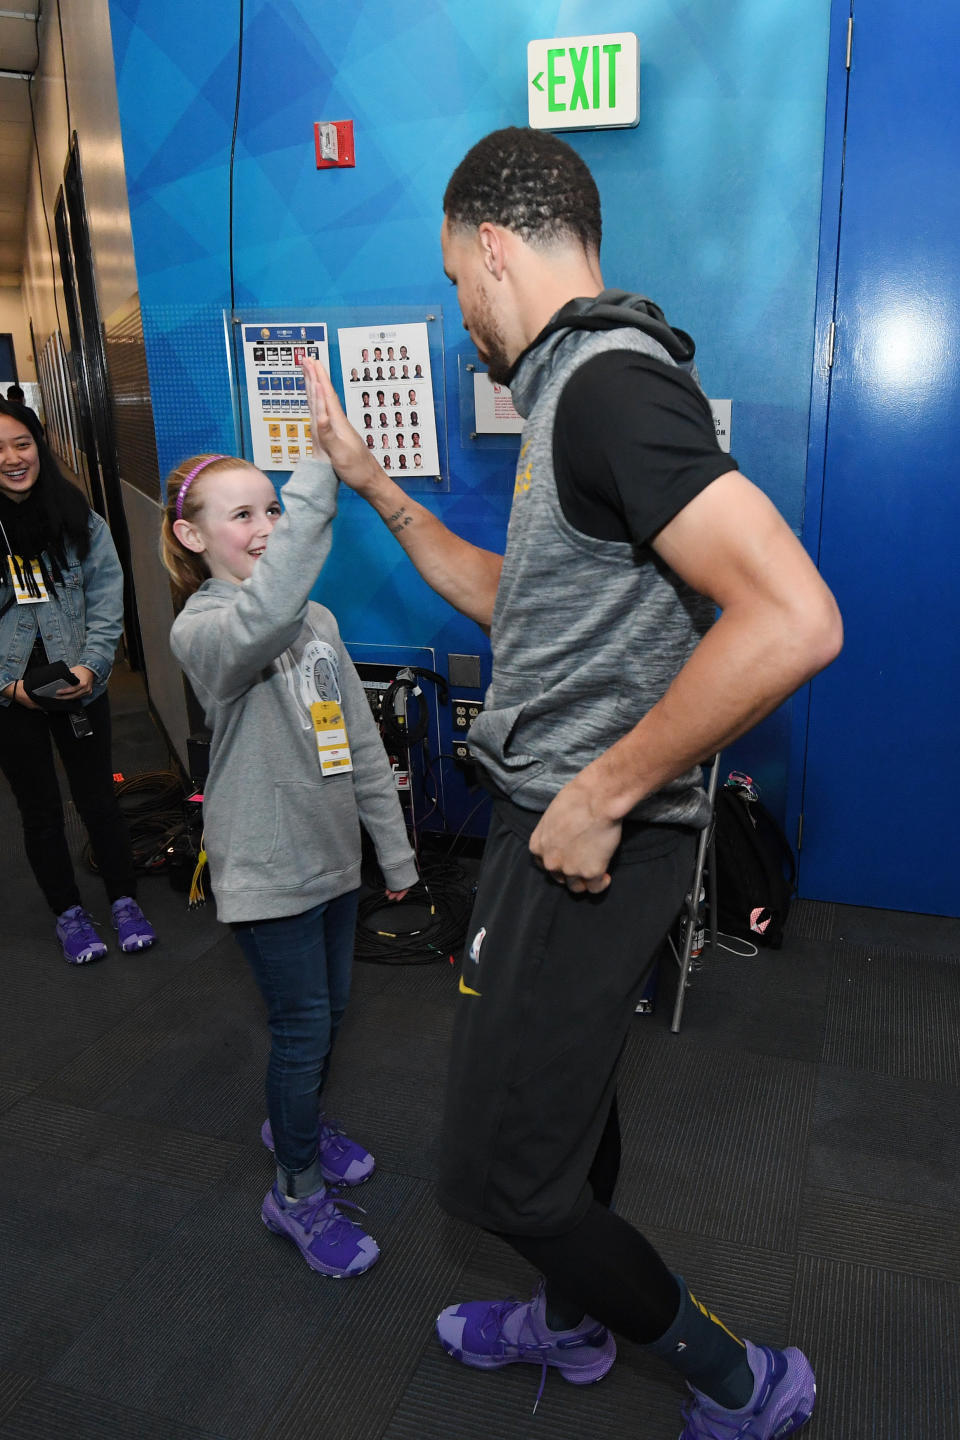 OAKLAND, CA - MARCH 8:  Riley Morrison high fives Stephen Curry #30 of the Golden State Warriors prior to the game against the Denver Nuggets on March 8, 2019 at ORACLE Arena in Oakland, California. NOTE TO USER: User expressly acknowledges and agrees that, by downloading and or using this photograph, user is consenting to the terms and conditions of Getty Images License Agreement. Mandatory Copyright Notice: Copyright 2019 NBAE (Photo by Noah Graham/NBAE via Getty Images)